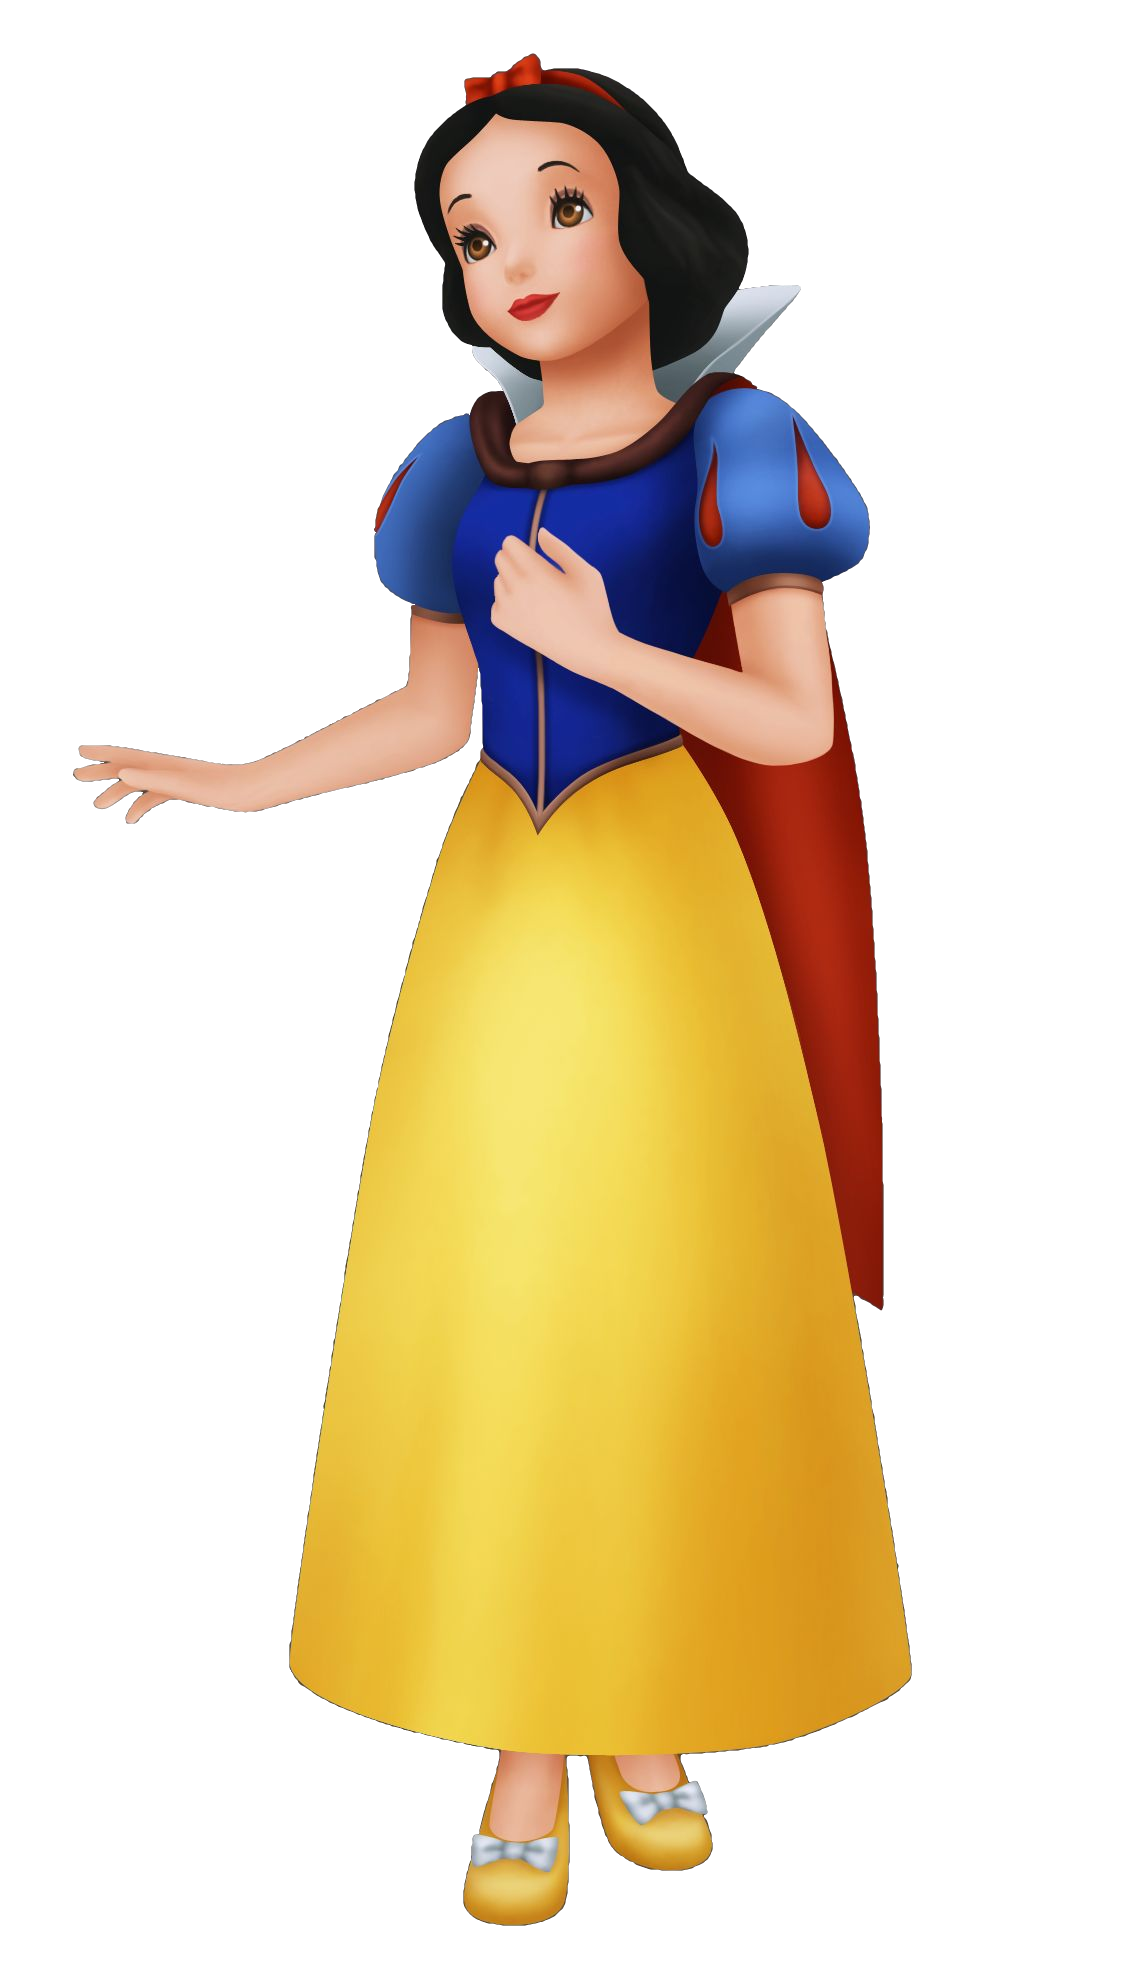 Clipart house snowing. Snow white character mario